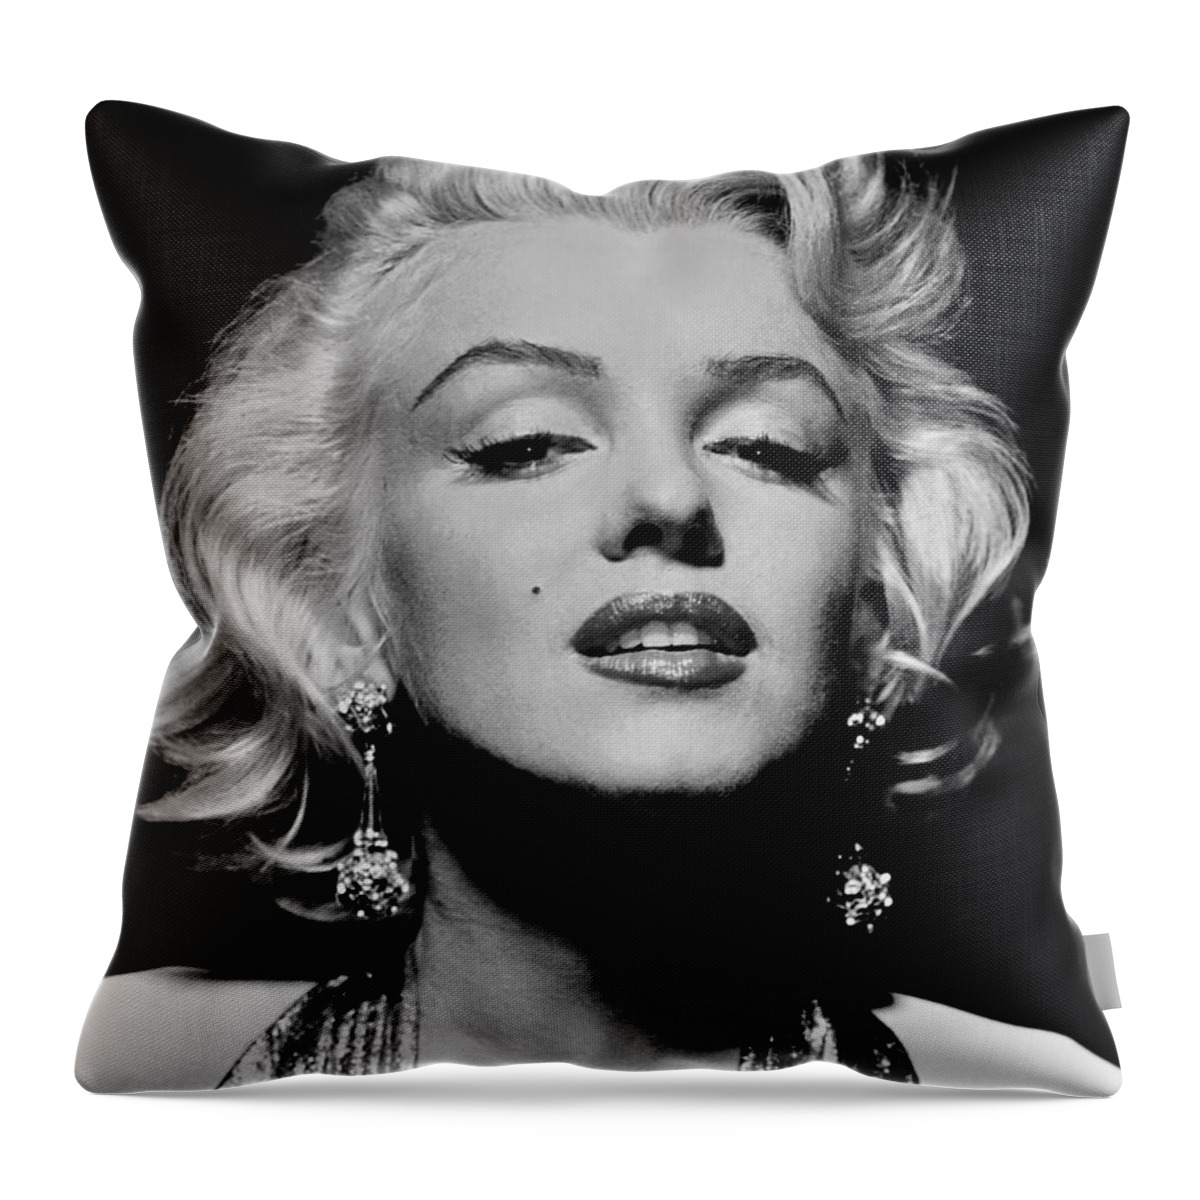 Marilyn Monroe Throw Pillow featuring the photograph Marilyn Monroe Black and White by Georgia Fowler